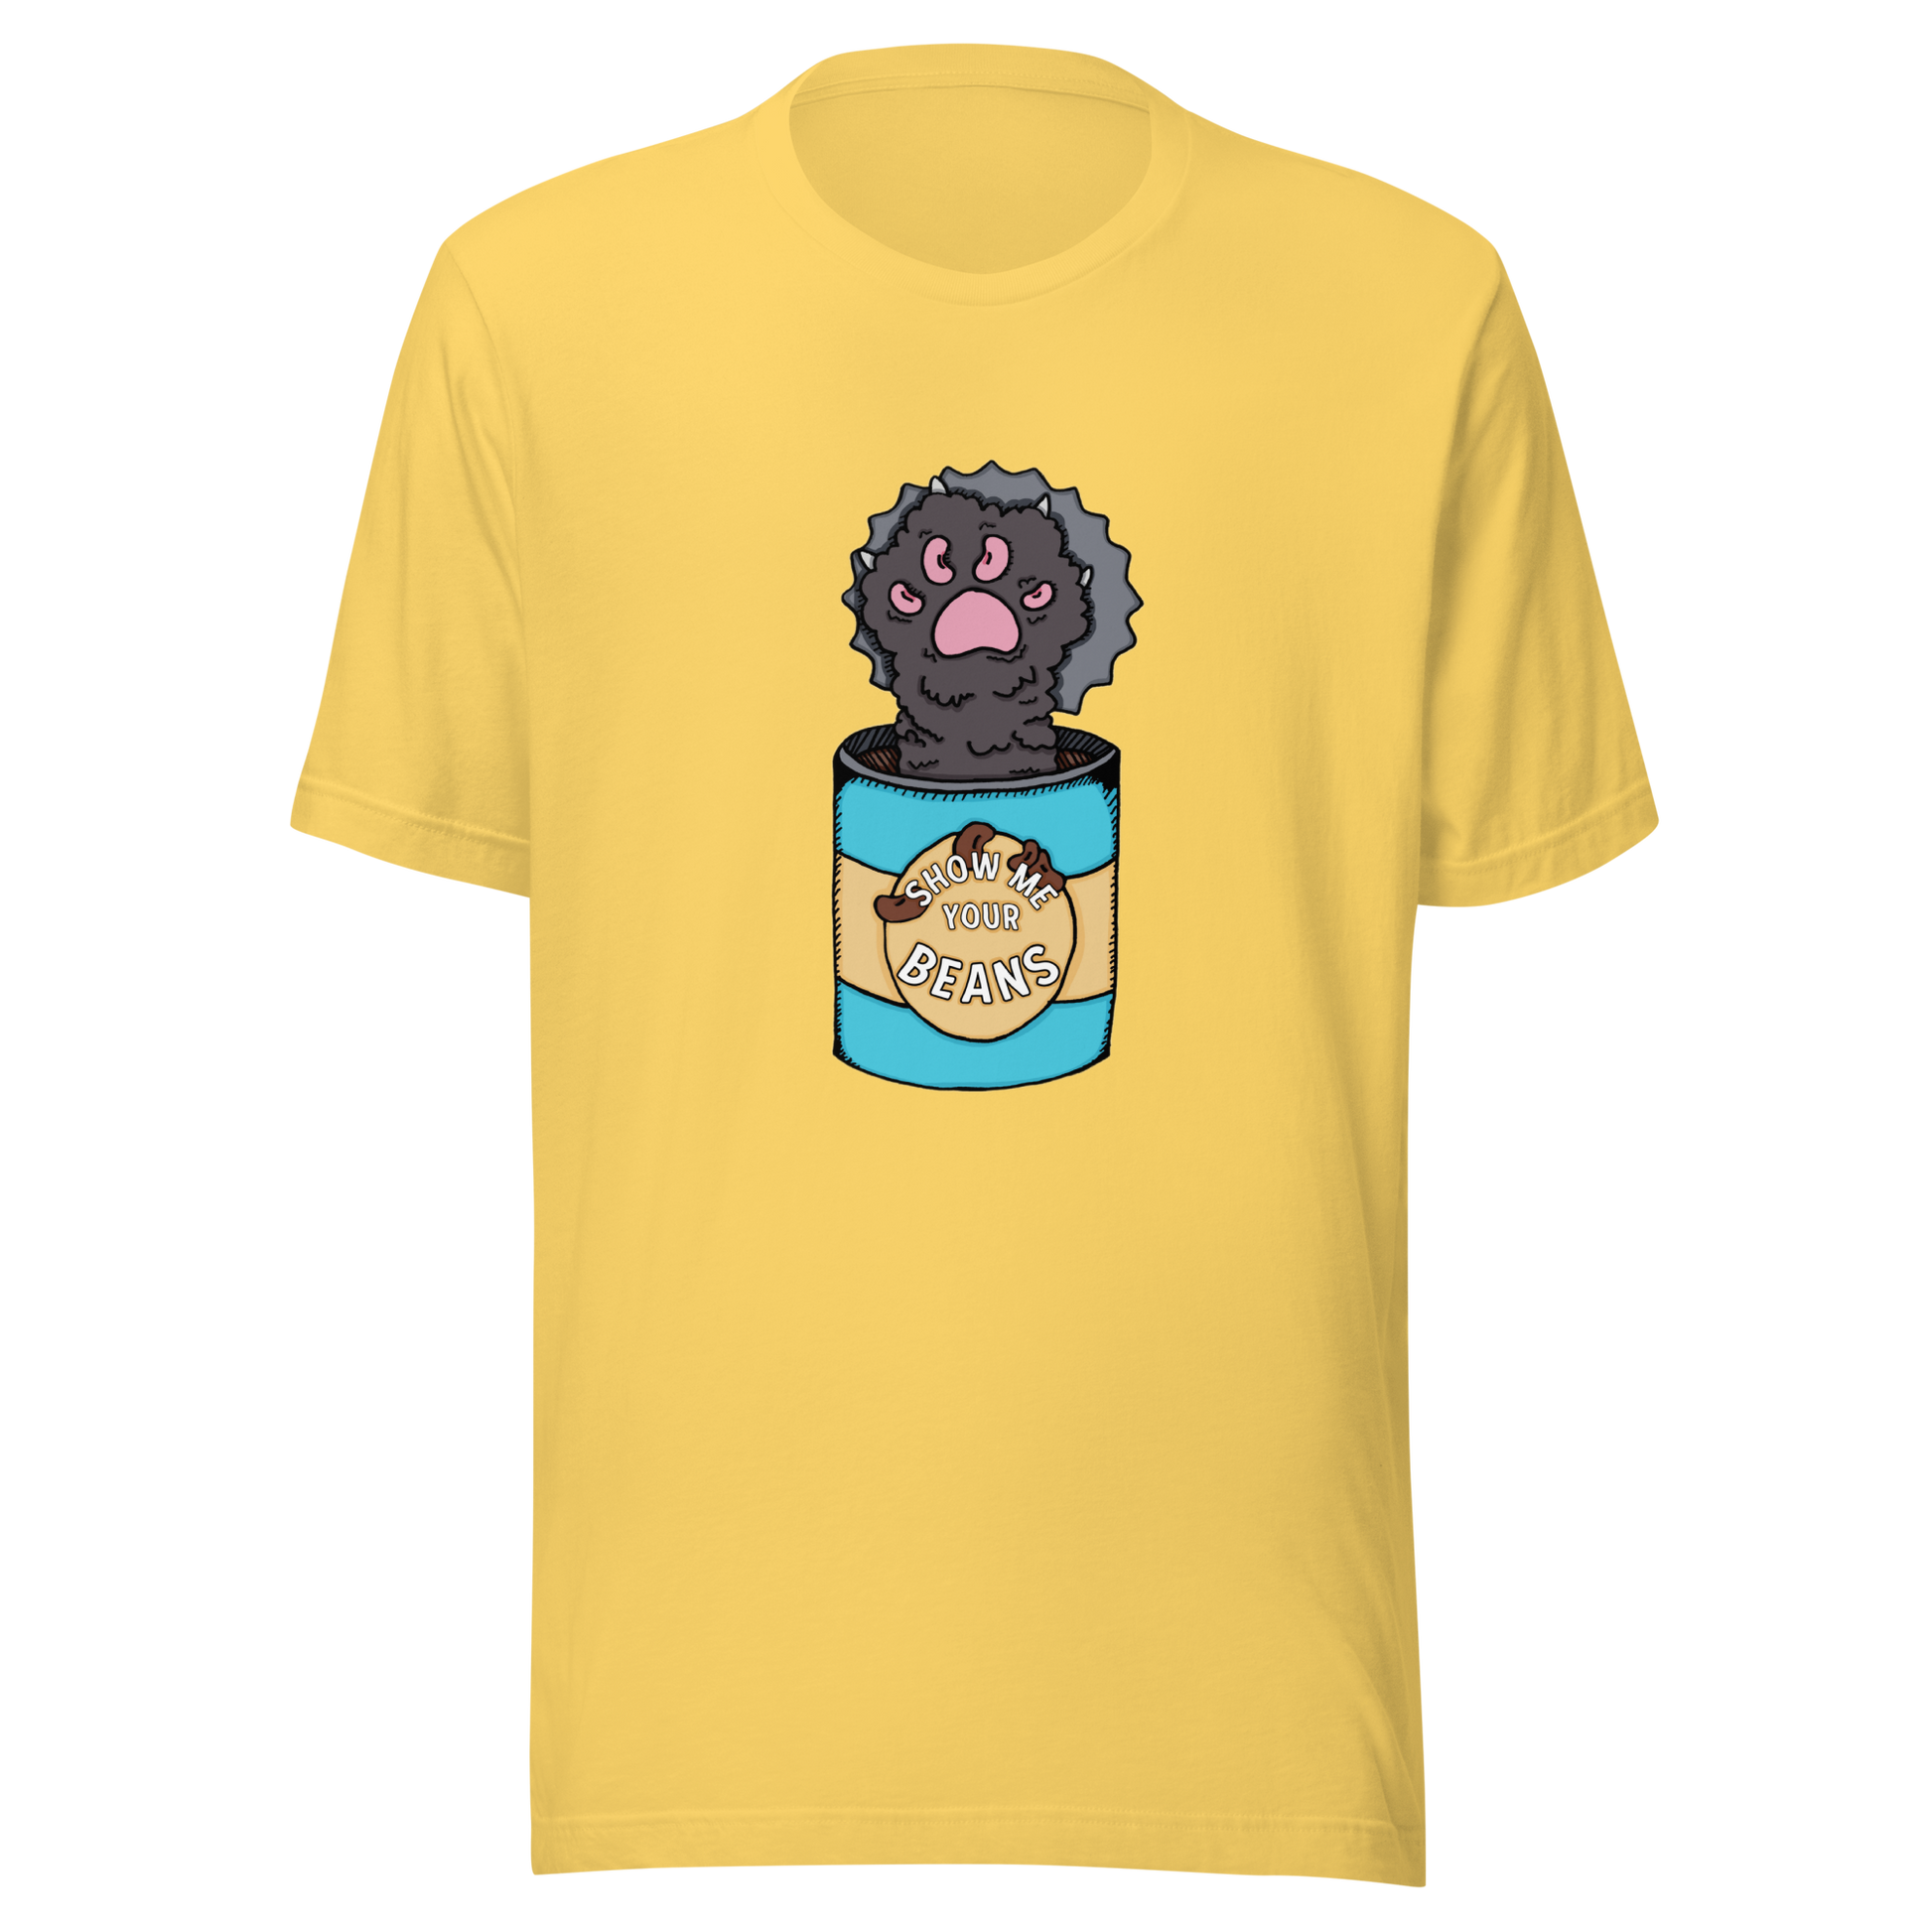 show me your beans t-shirt in yellow - gaslit apparel